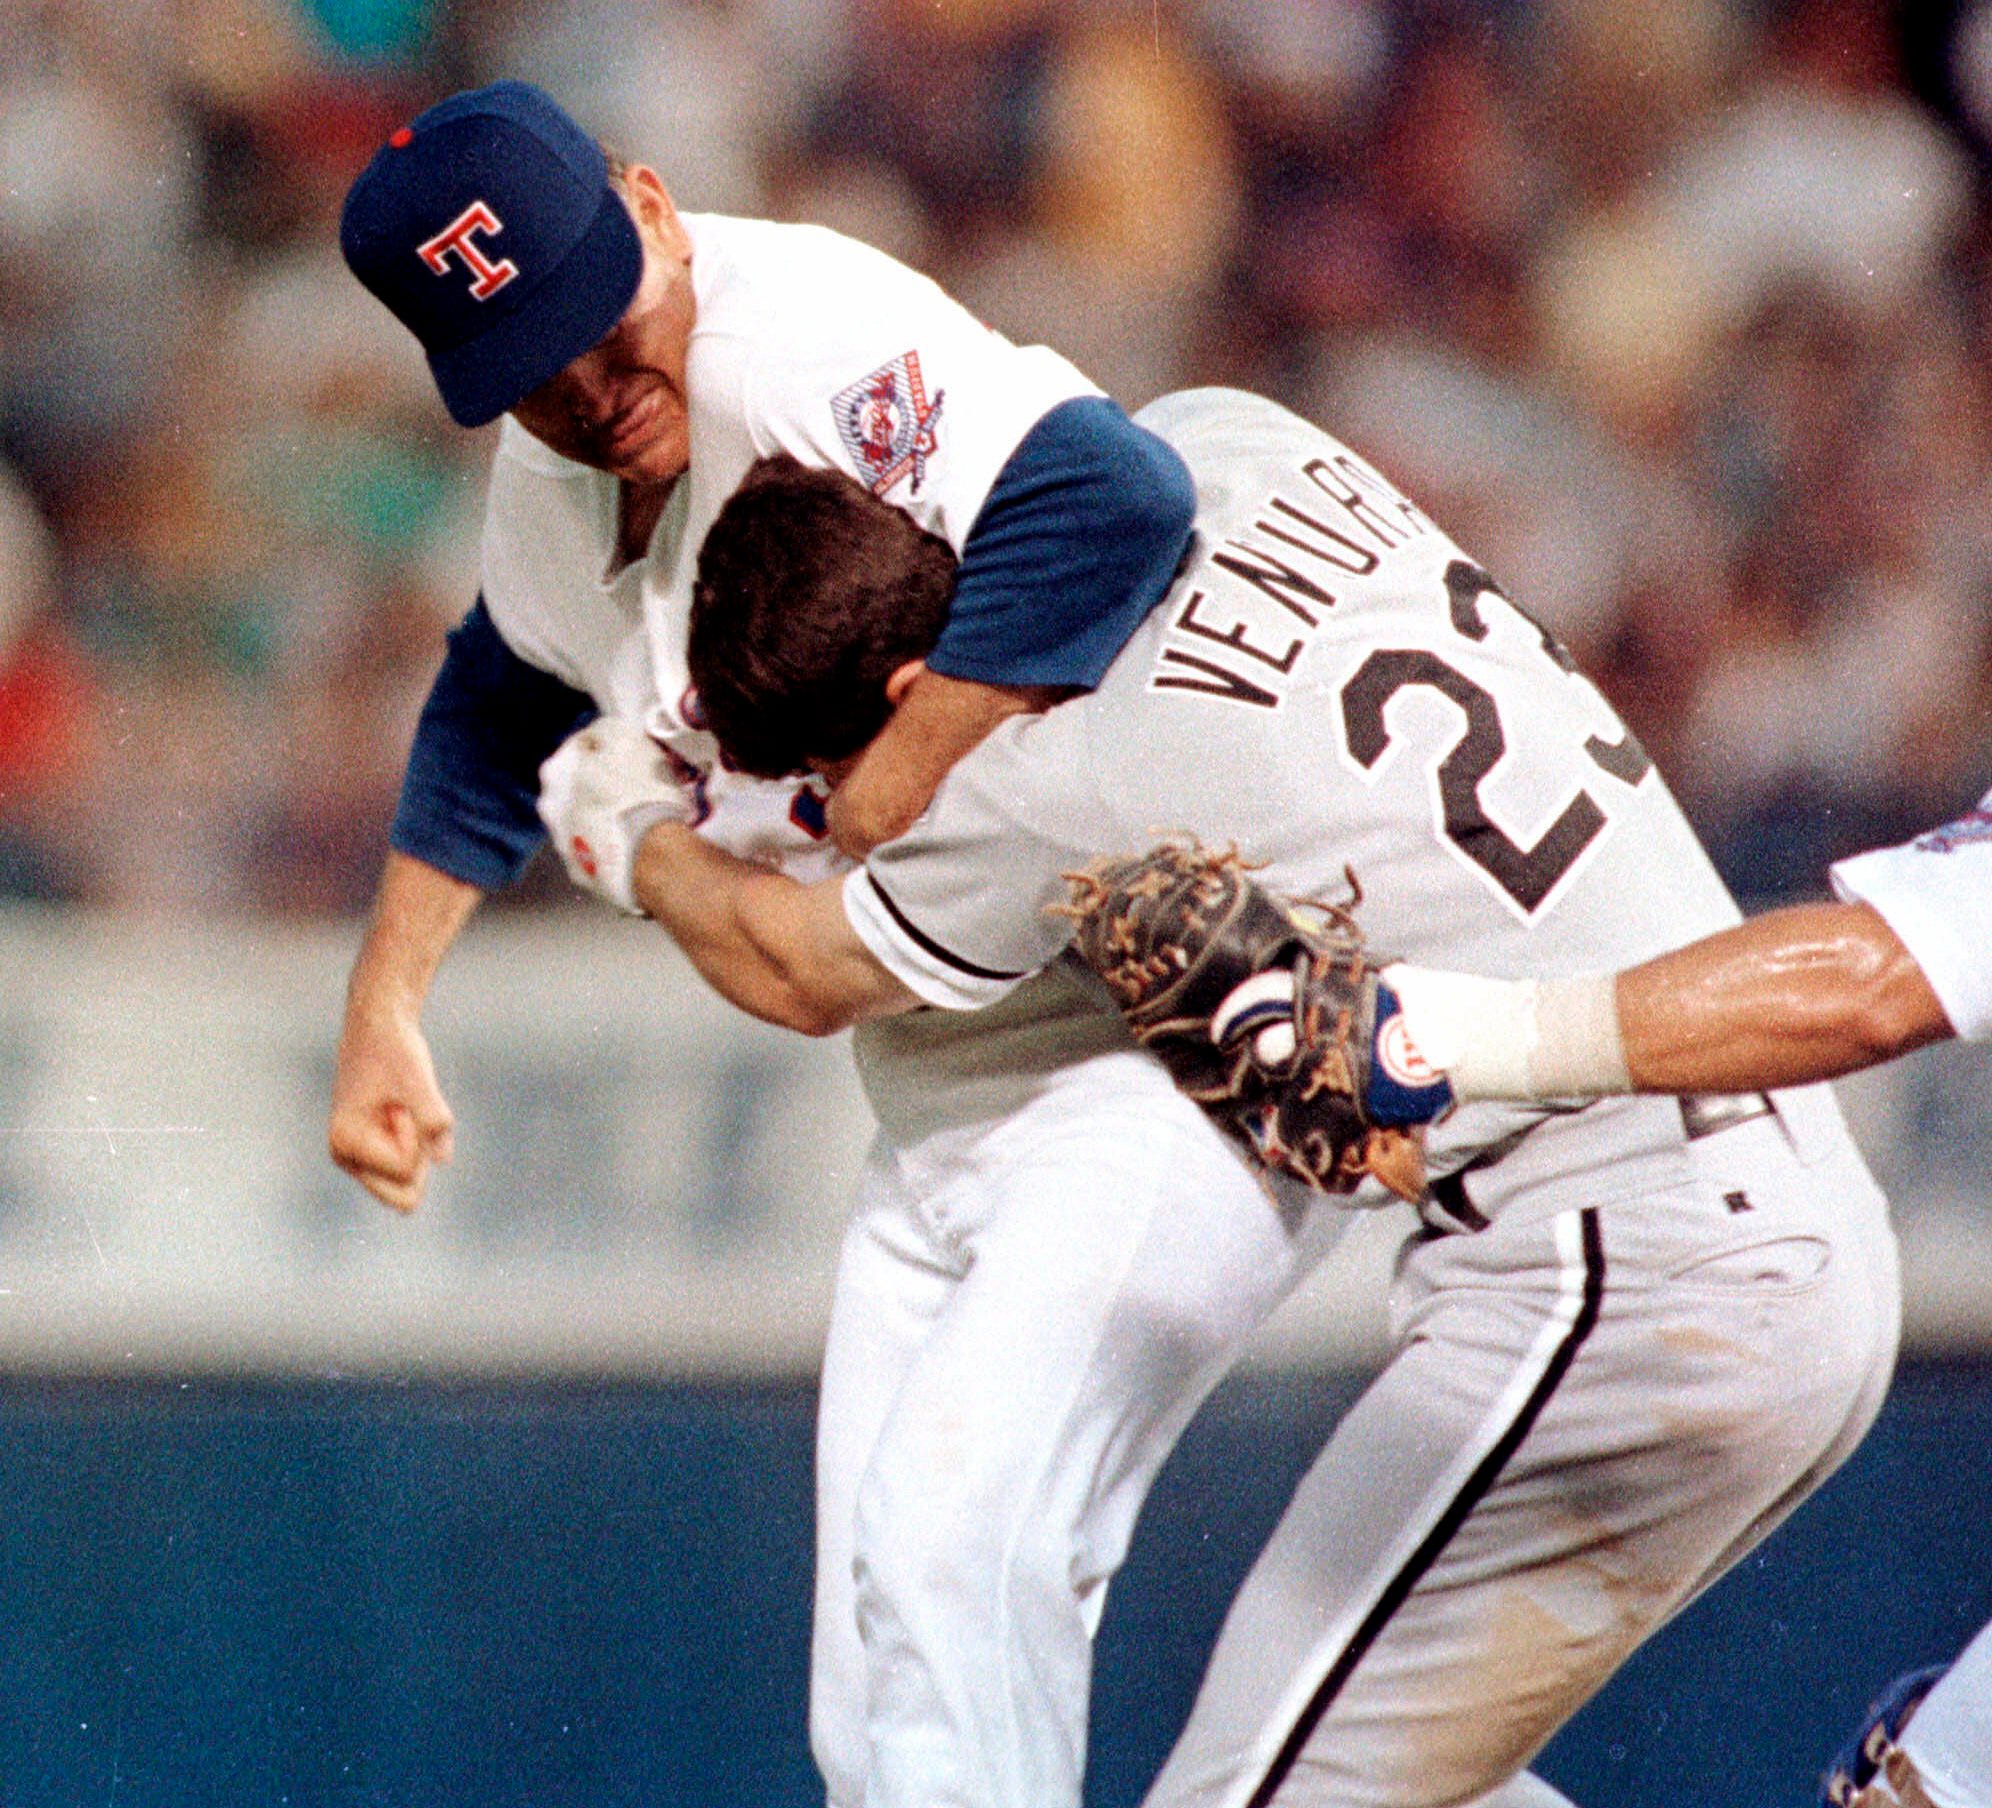 Texas Sports Hall of Fame to honor Nolan Ryan with new exhibit